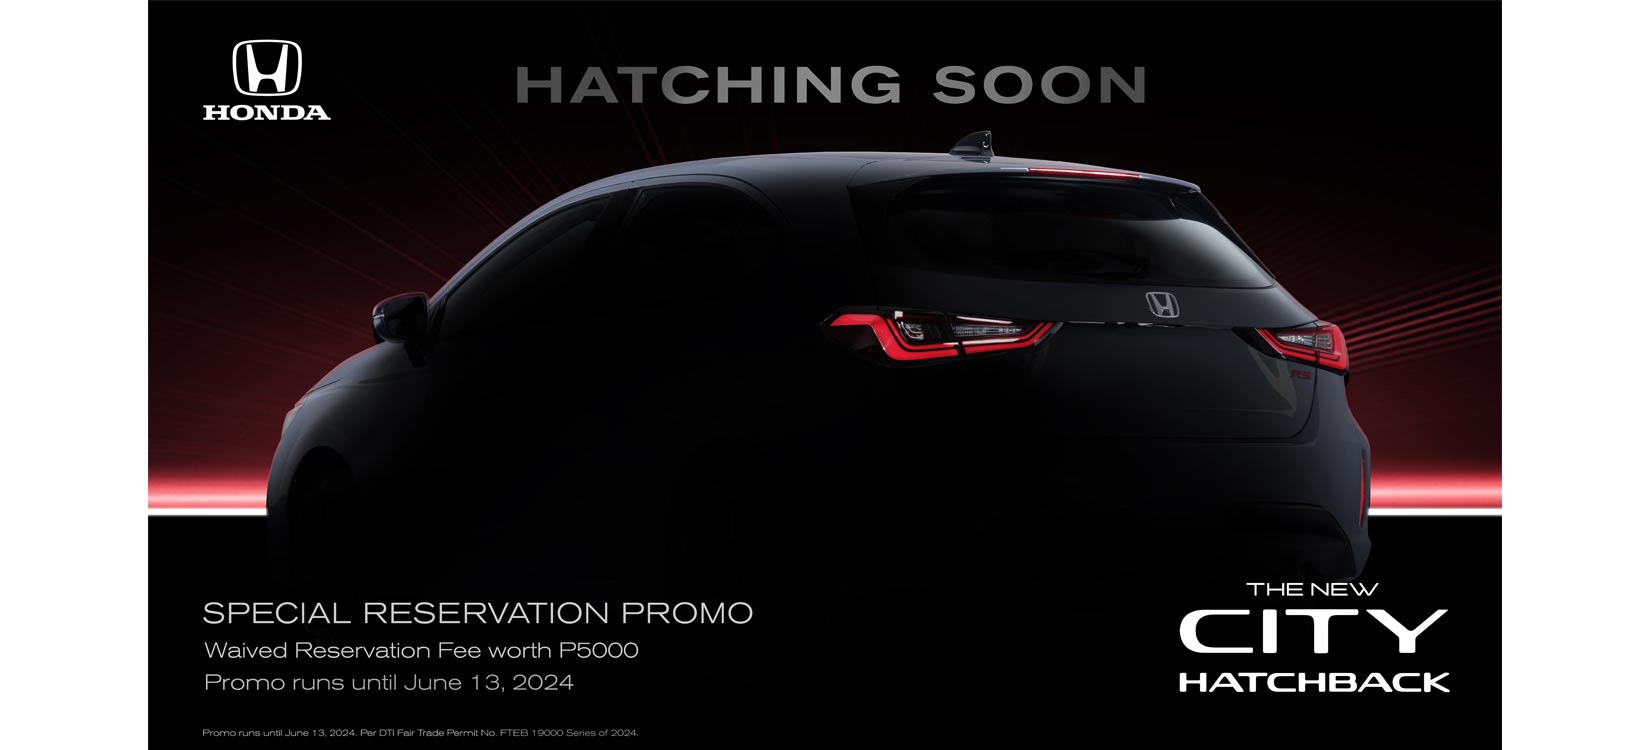 New Honda City Hatchback Pre-Order with Waived Reservation Fee Available Now!